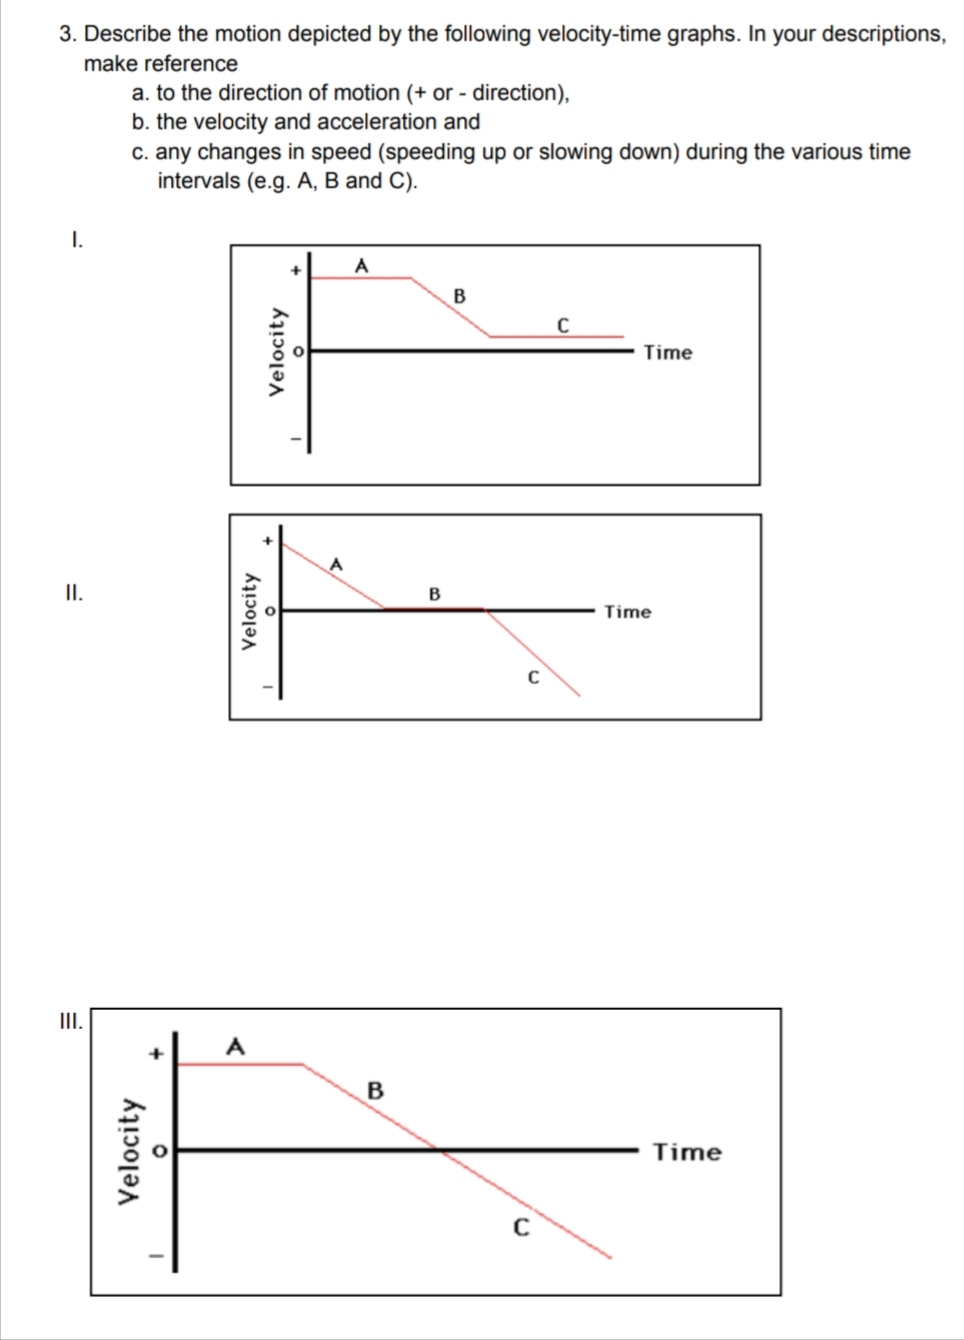 3. Describe the motion depicted by the following velocity-time graphs. In your descriptions,
make reference
I.
II.
III.
a. to the direction of motion (+ or - direction),
b. the velocity and acceleration and
c. any changes in speed (speeding up or slowing down) during the various time
intervals (e.g. A, B and C).
Velocity
Velocity
A
Velocity
A
B
B
B
C
C
C
Time
Time
Time